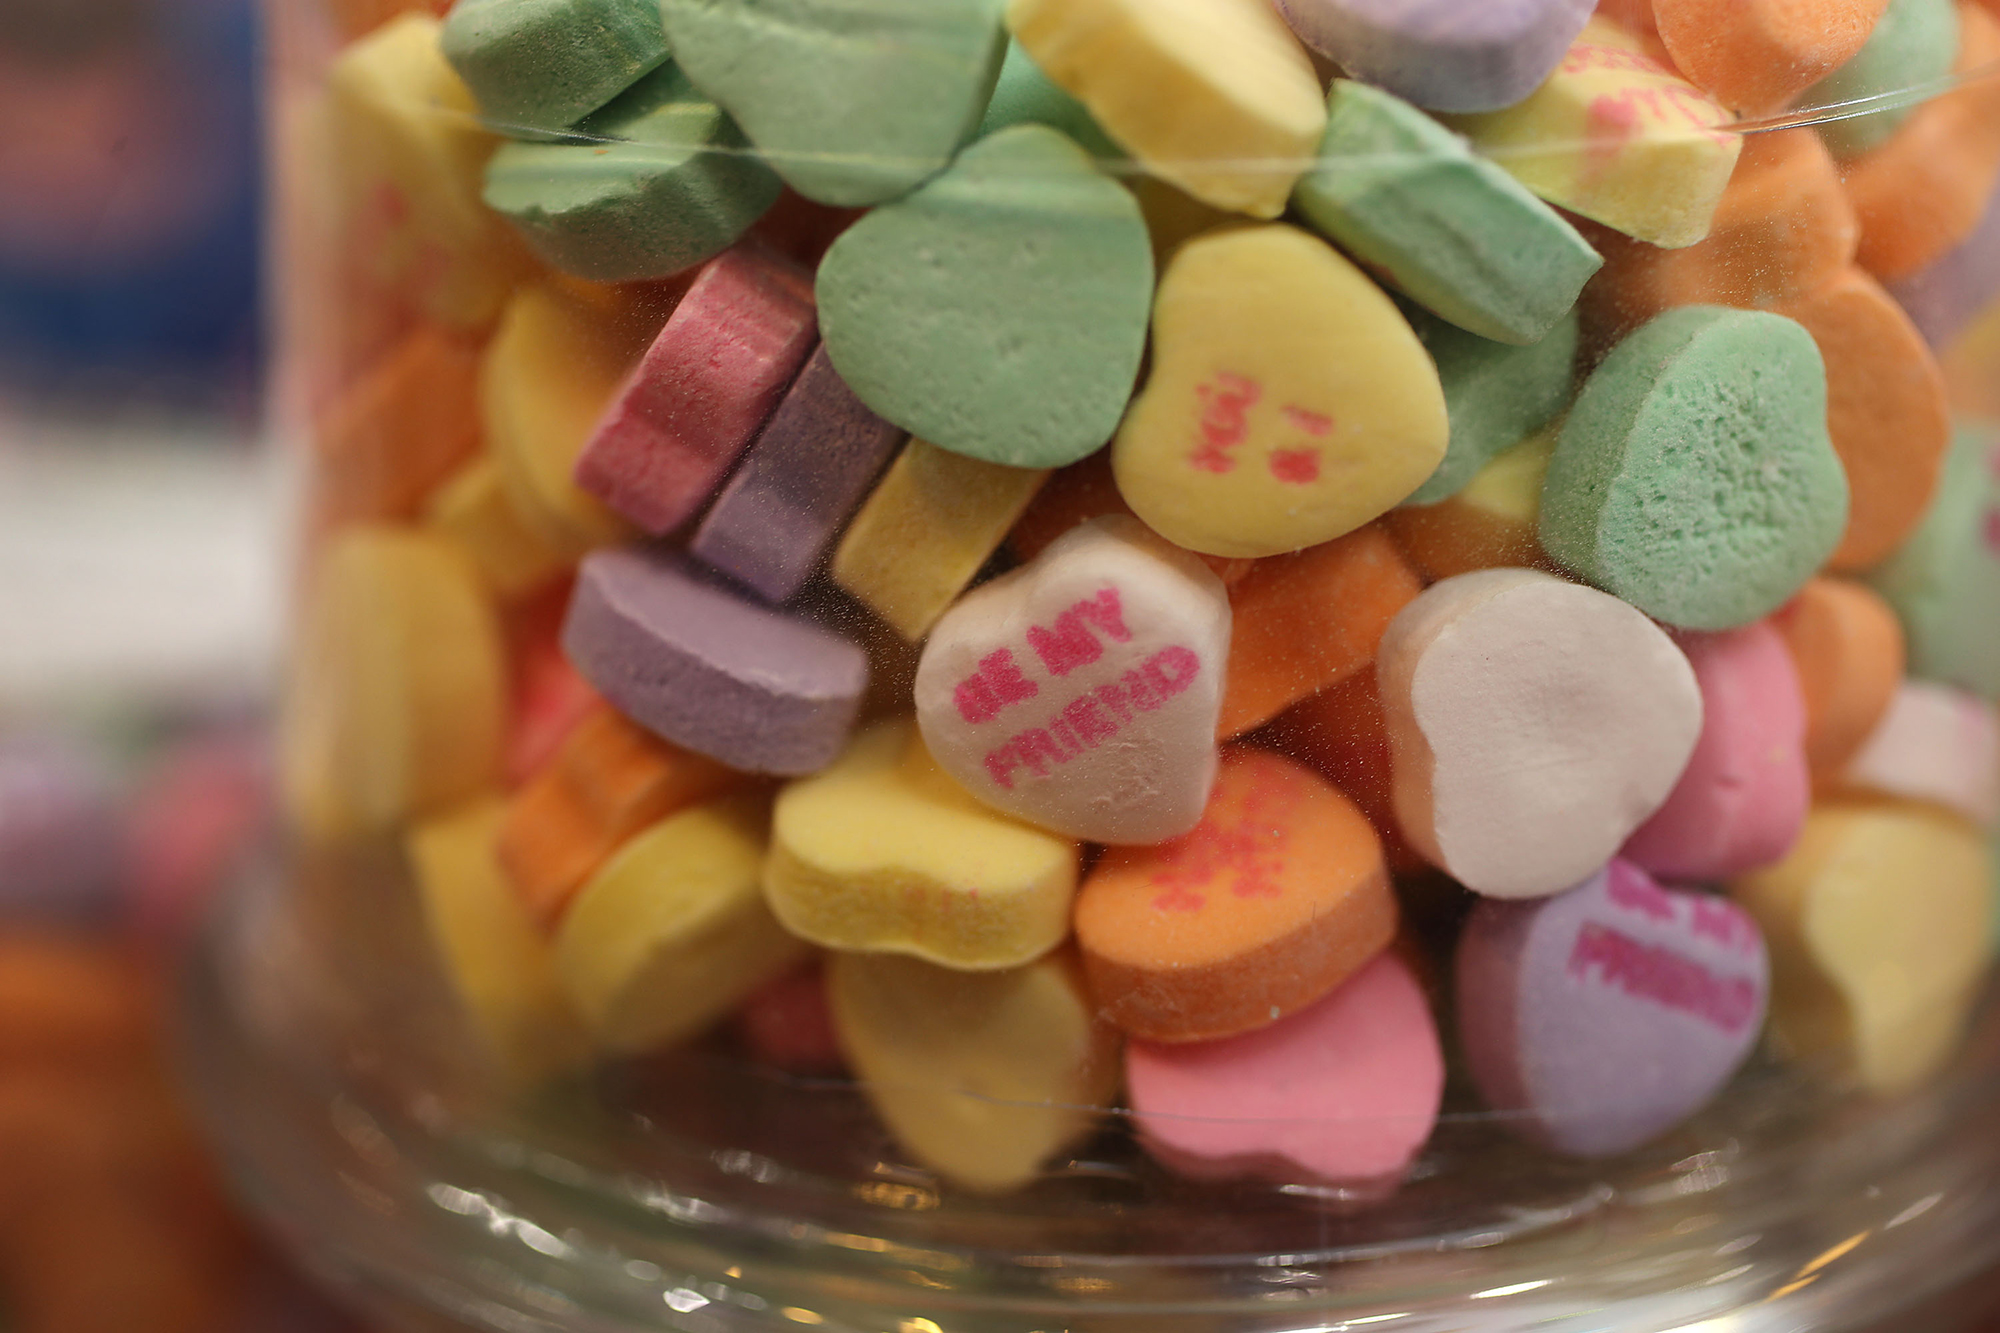 BONUS What's Going On In Indian Country: NSRGNTS Conversation Hearts